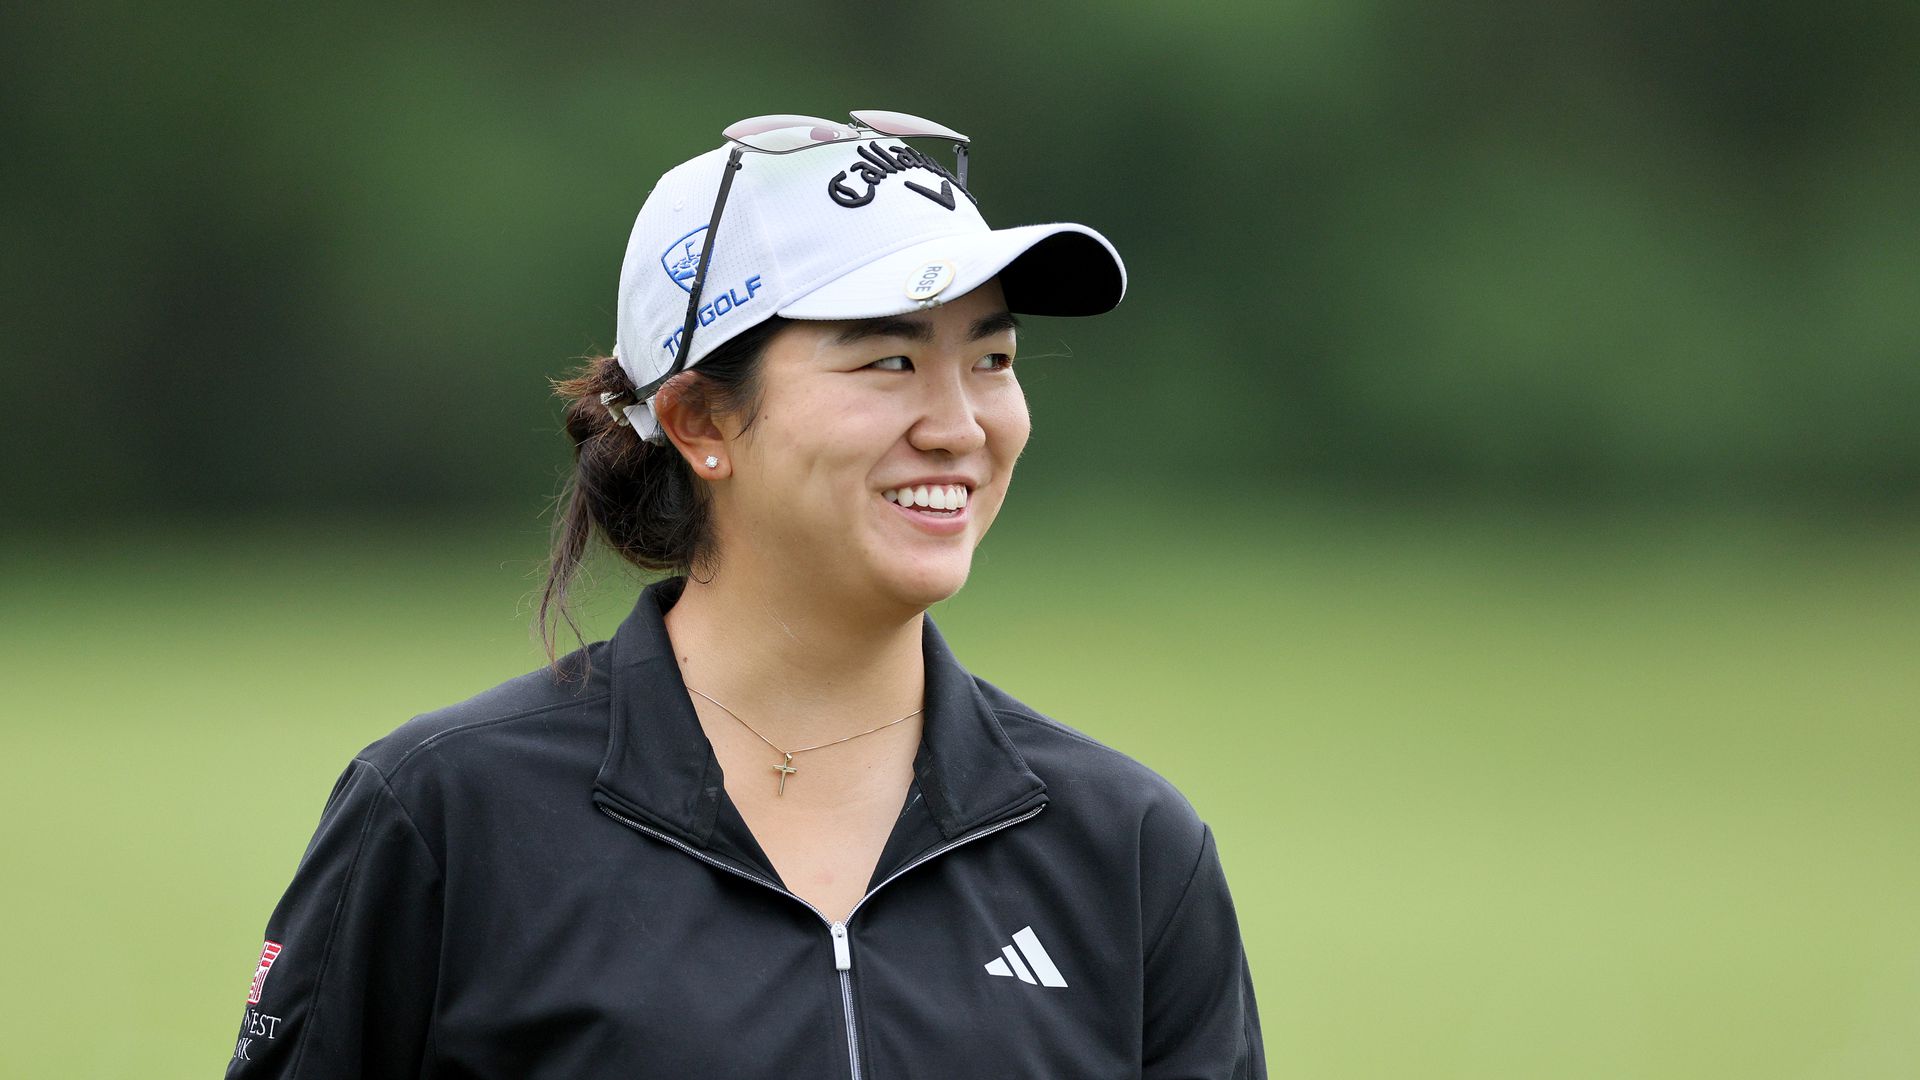 rose zhang flip flops on leaping into lake with chevron championship win